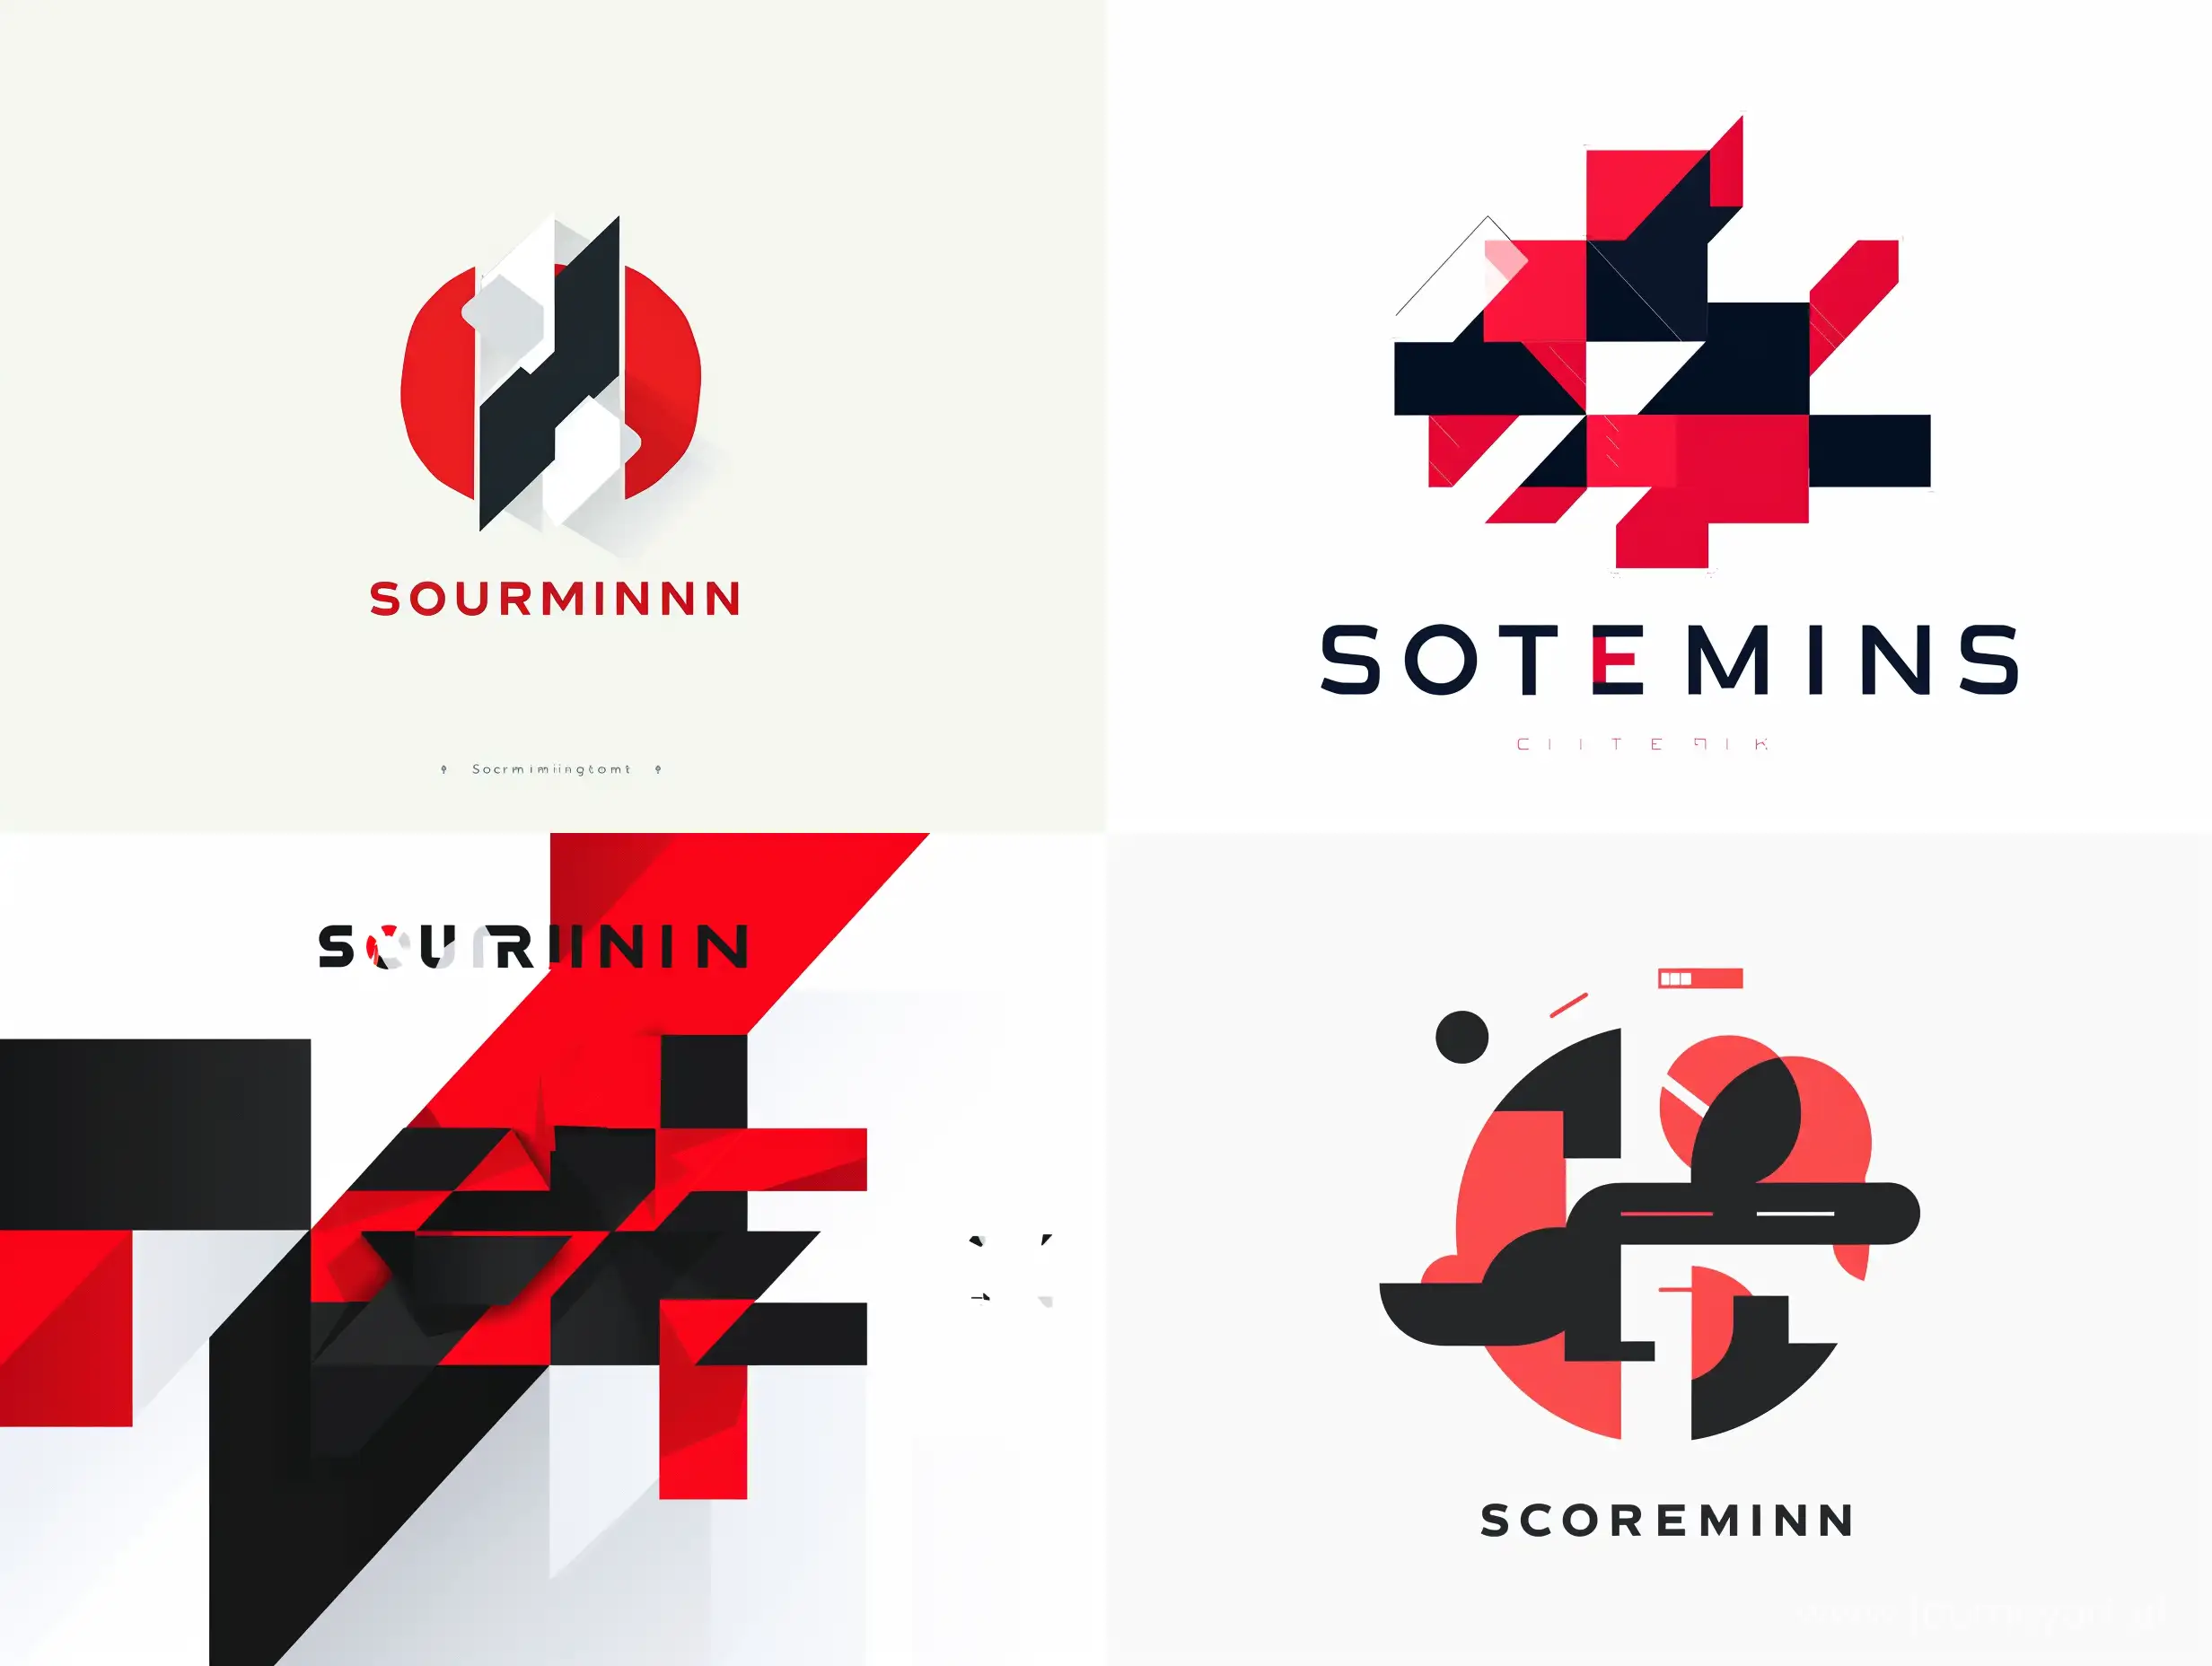 best logo minimalistic flat design for marketing agency named "scoreminds". colors: red, black, white. use only letters